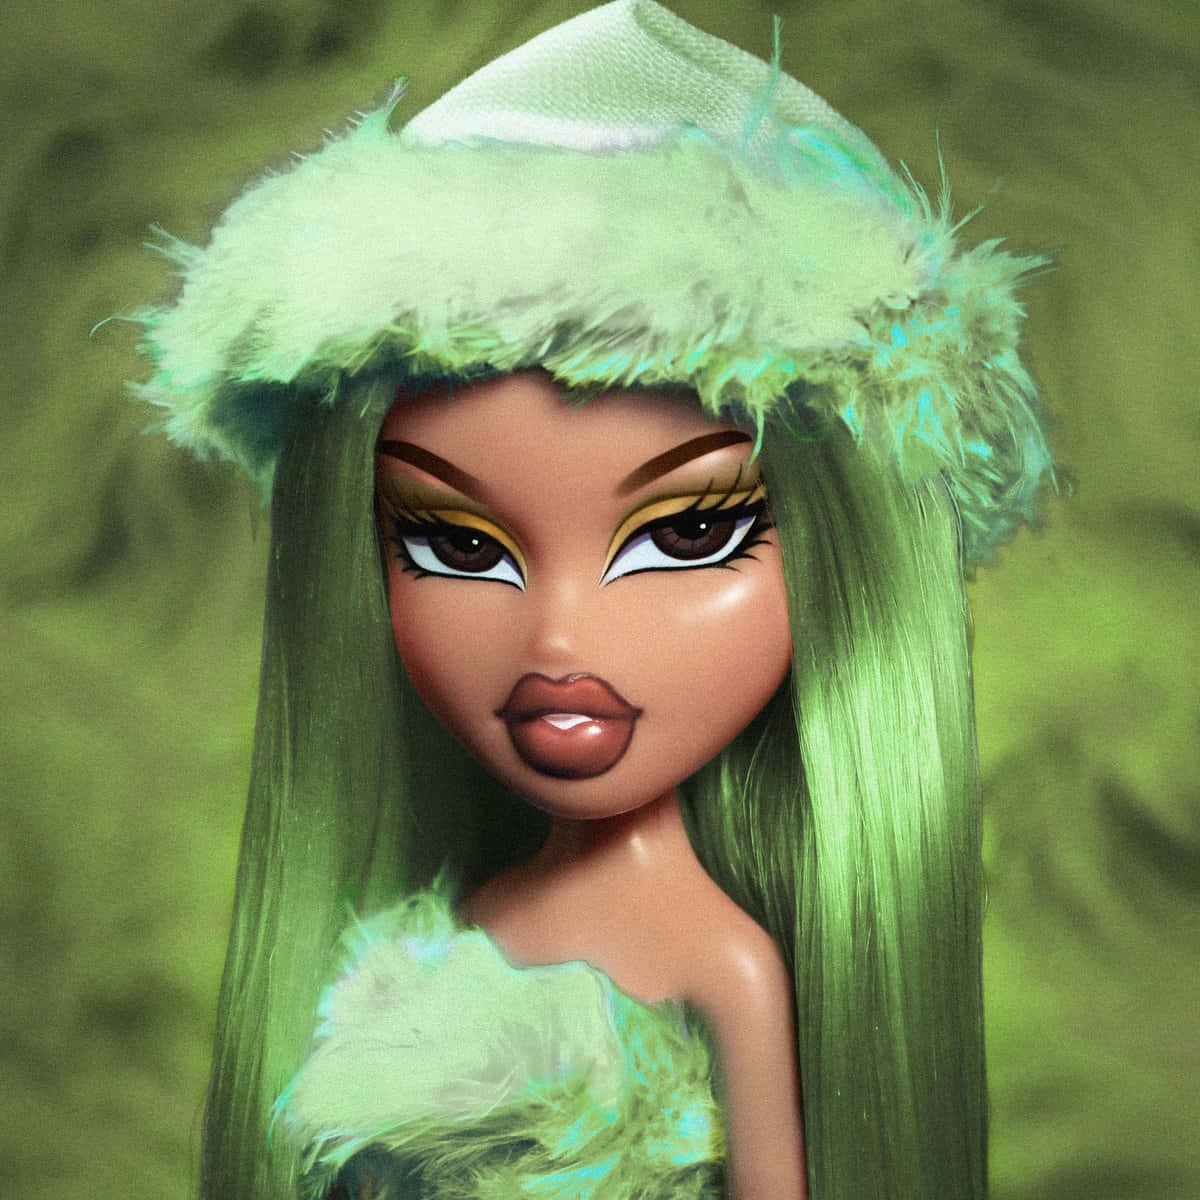 A Doll With Long Green Hair And A Furry Hat